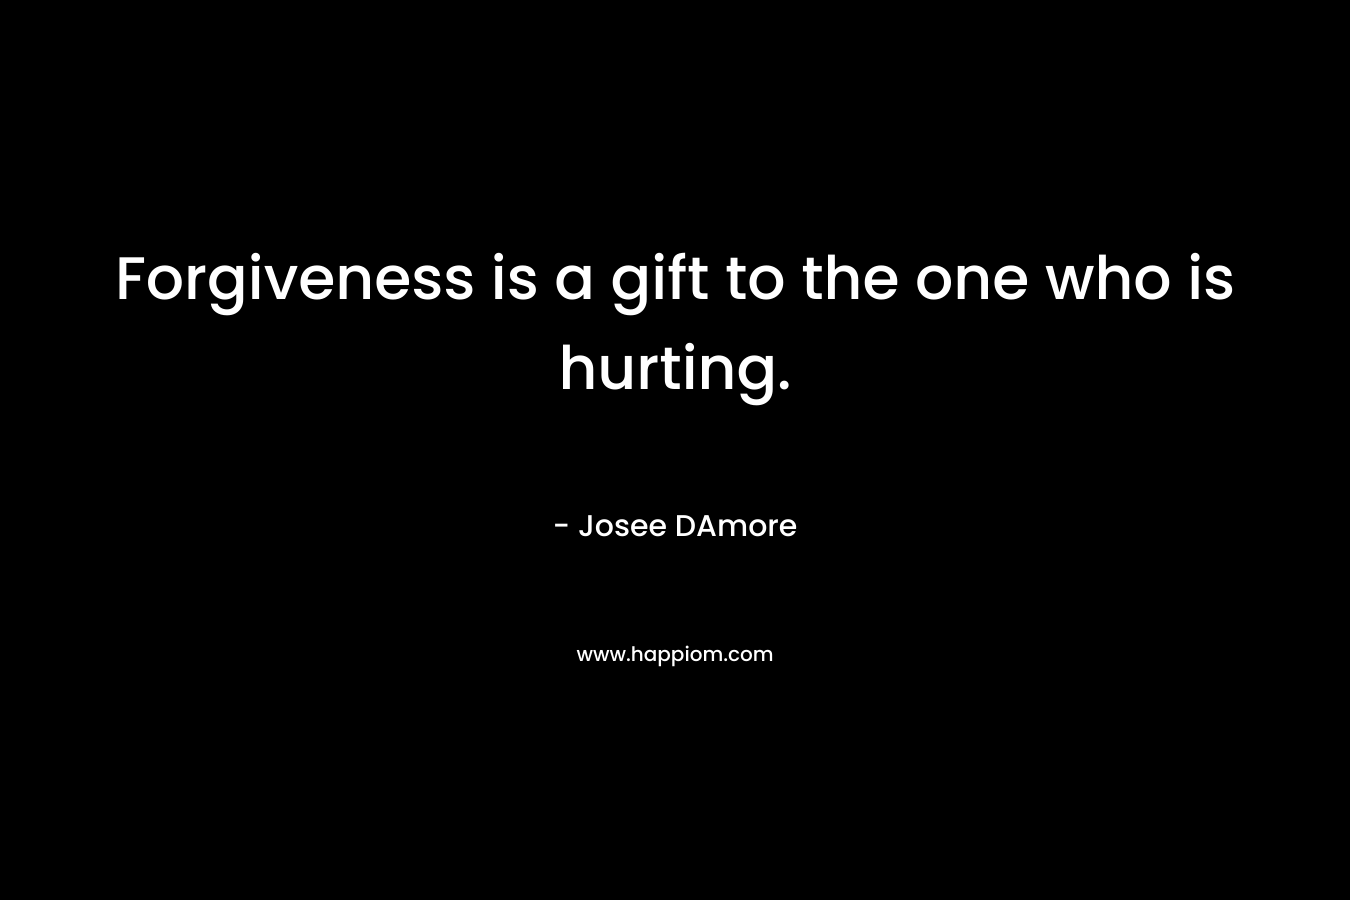 Forgiveness is a gift to the one who is hurting. – Josee DAmore